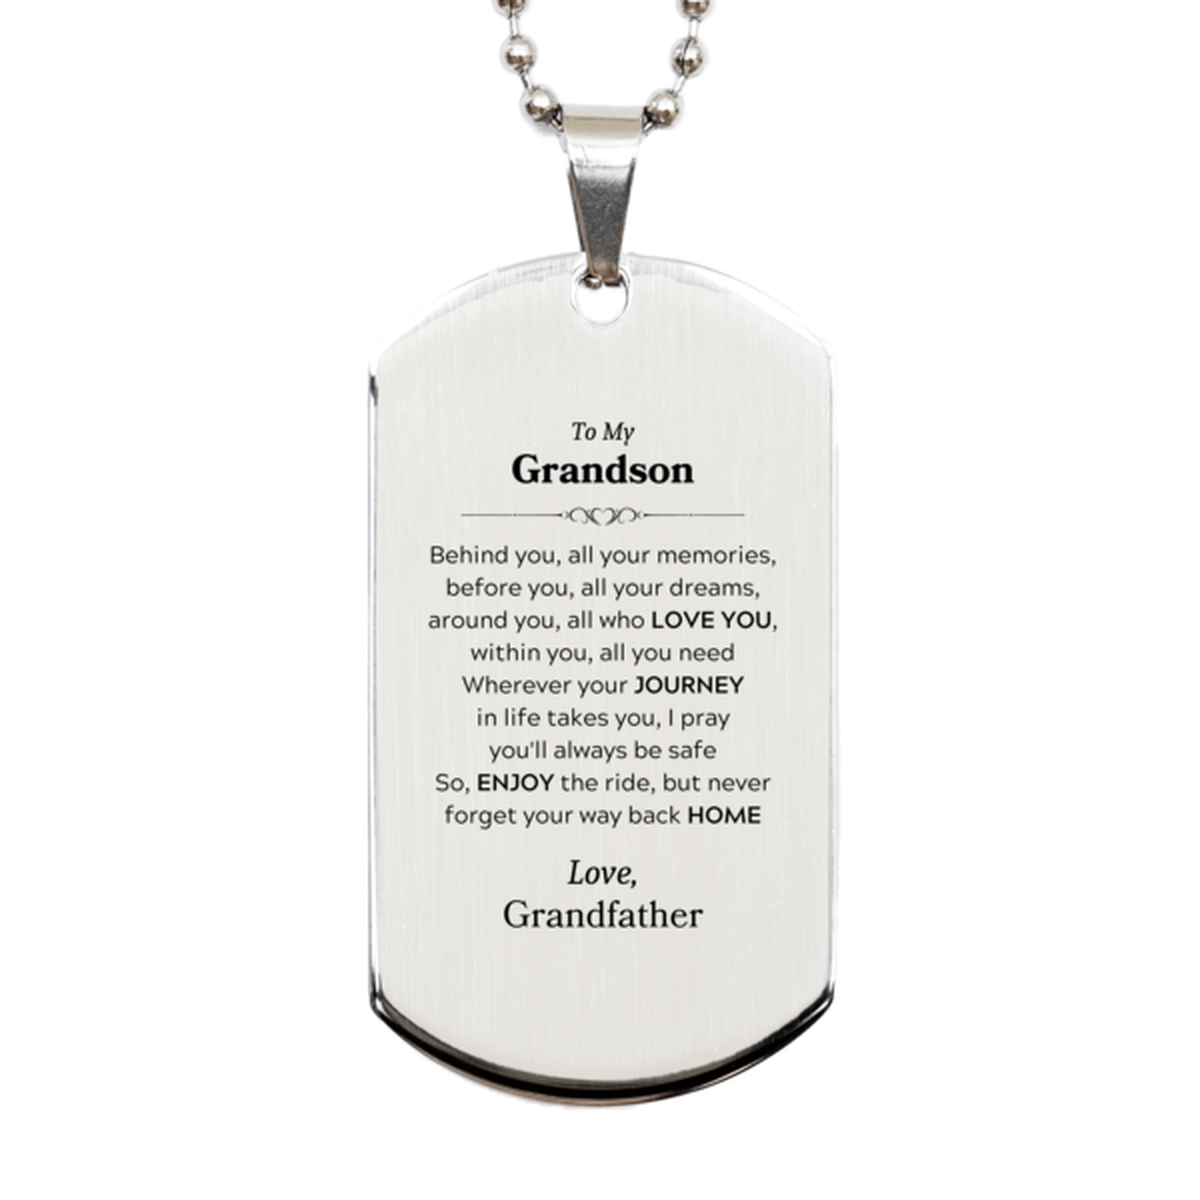 To My Grandson Graduation Gifts from Grandfather, Grandson Silver Dog Tag Christmas Birthday Gifts for Grandson Behind you, all your memories, before you, all your dreams. Love, Grandfather